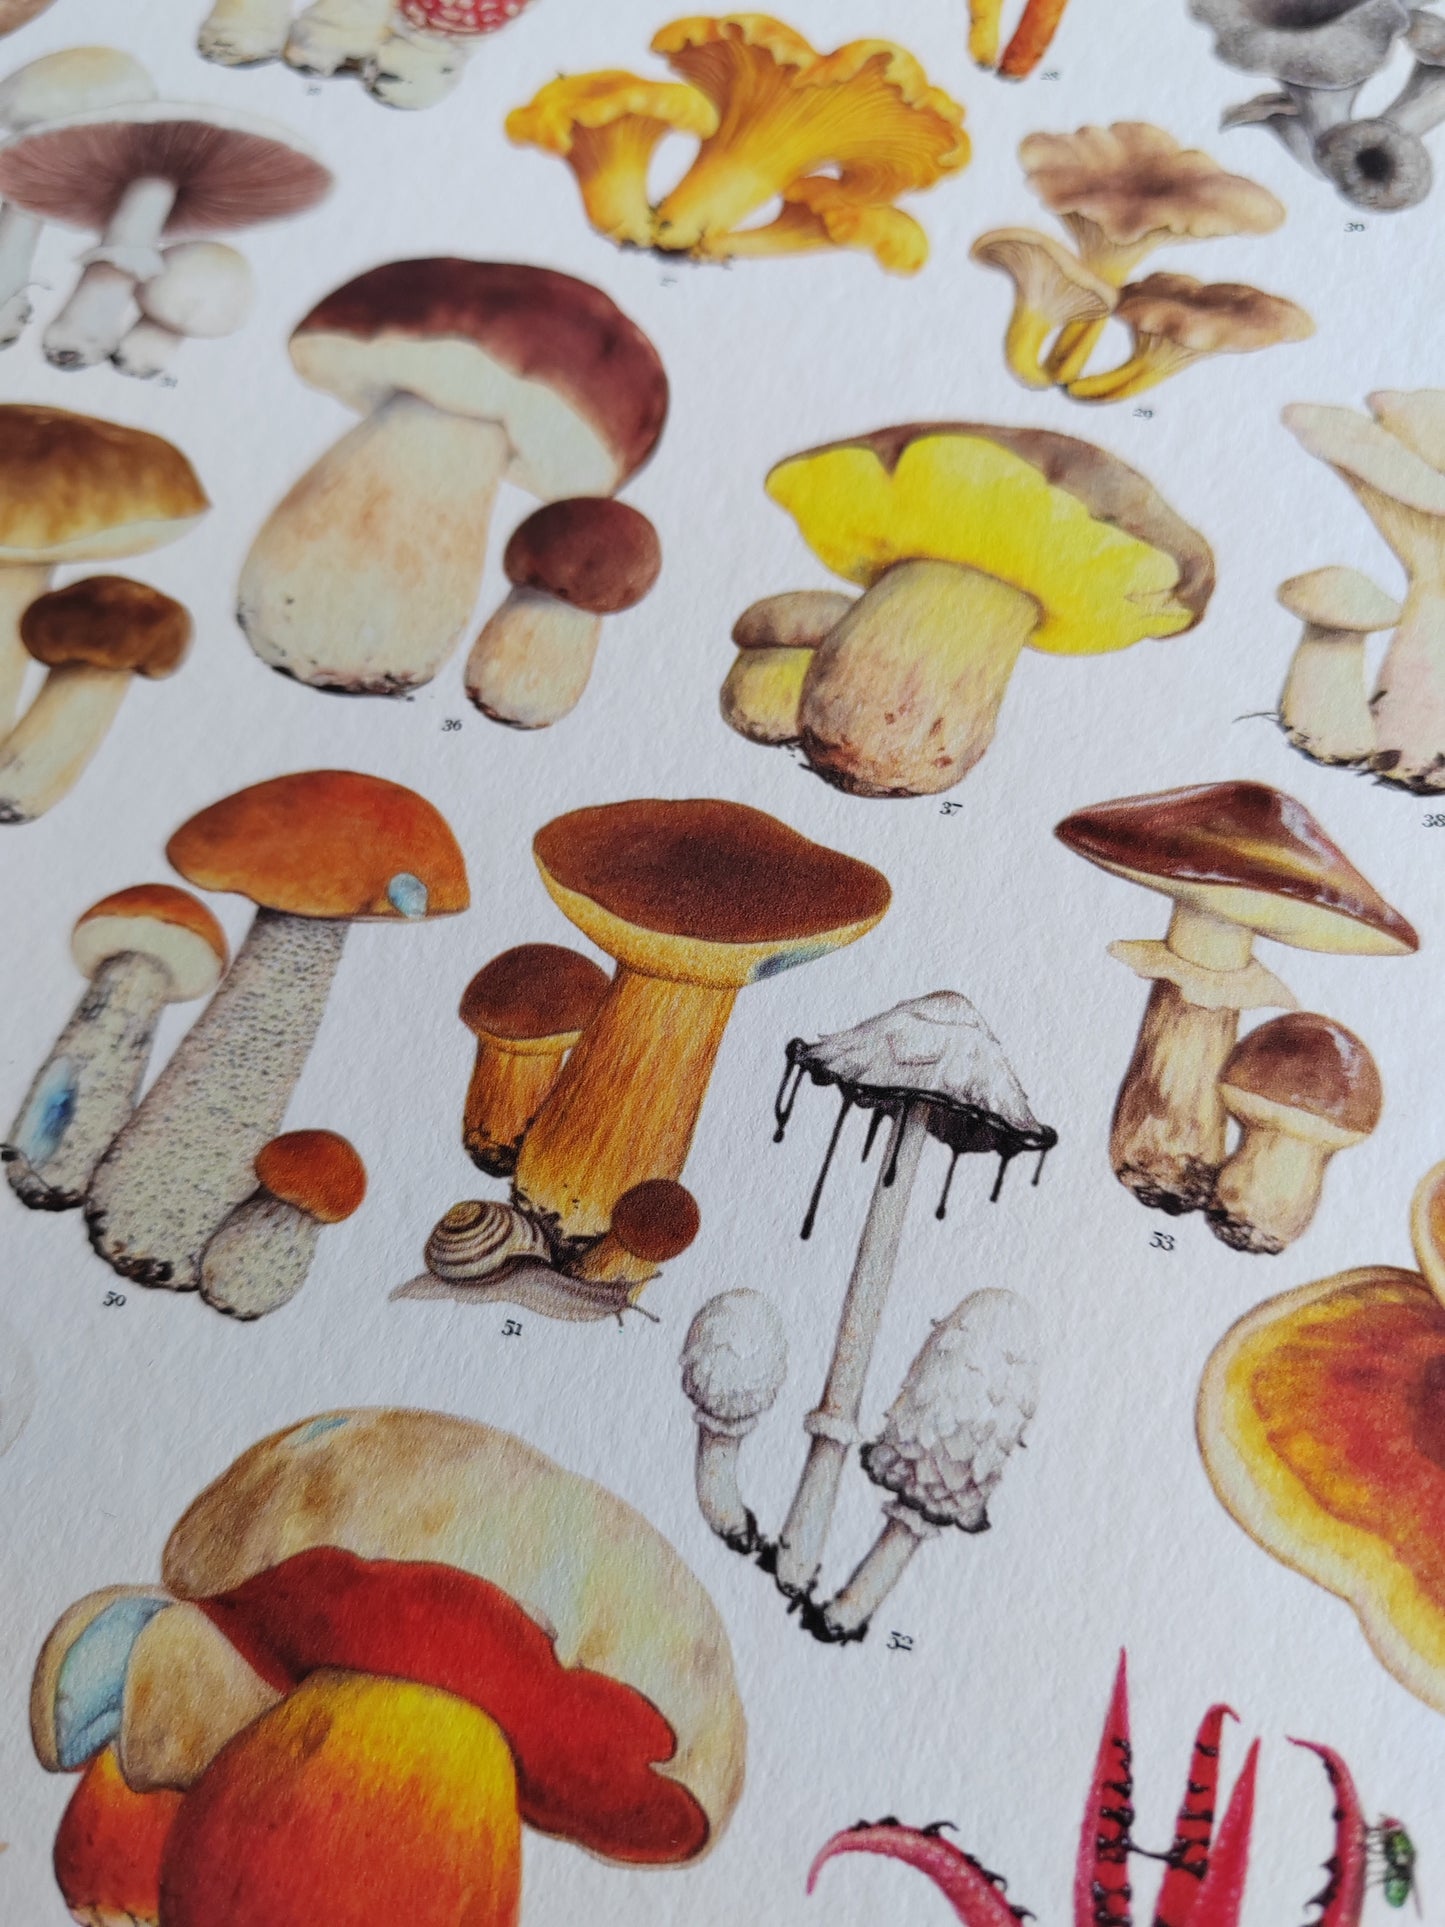 Essential Fungi A3 size Limited edition art print with Key to species